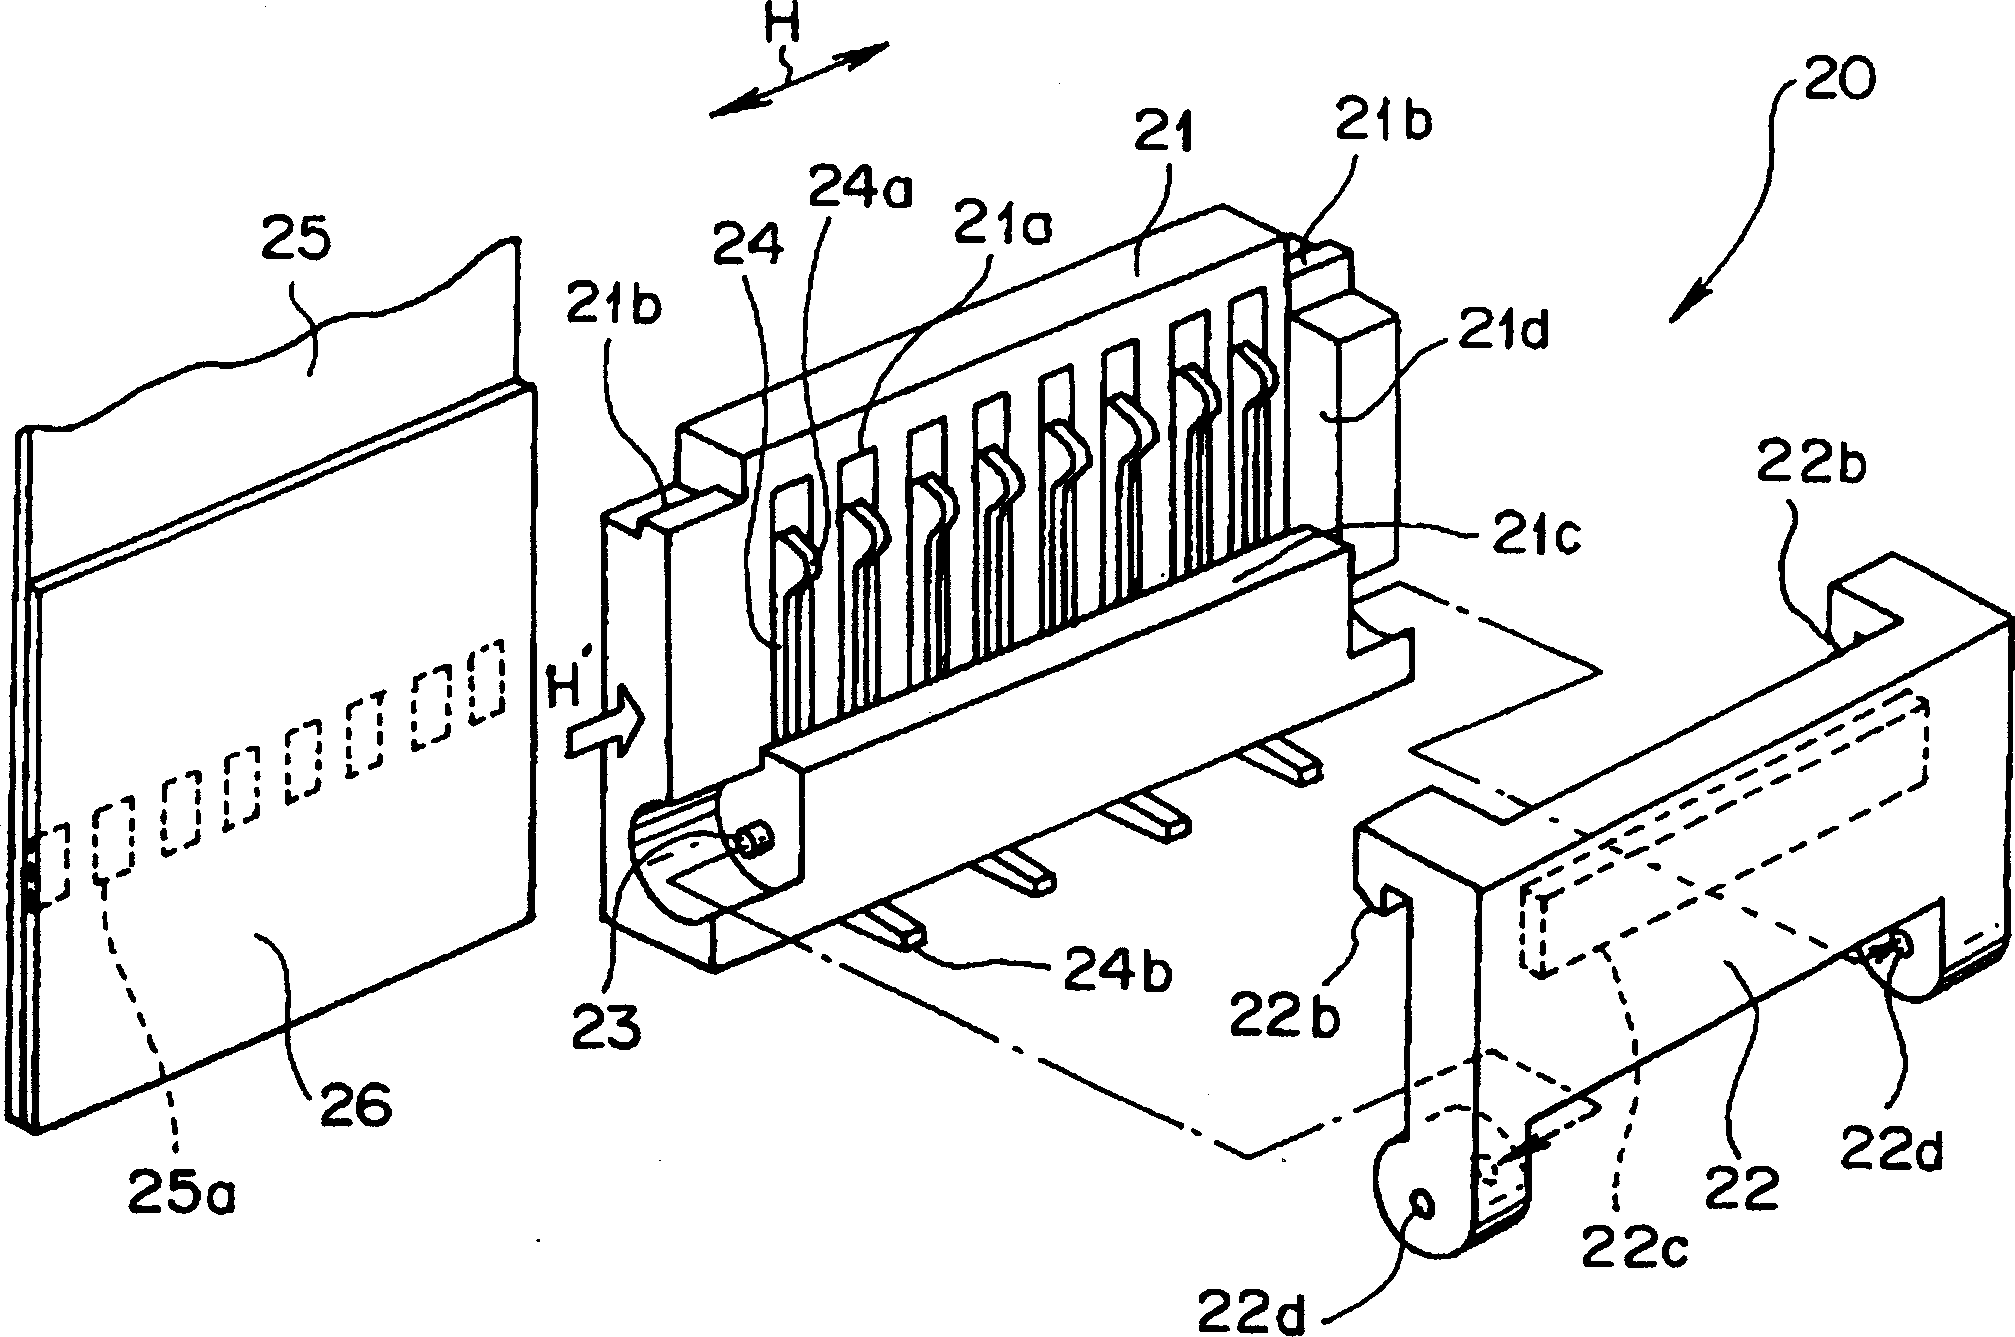 Connector for connecting flexible printed circuit tobard and flexible printed circuit board for connecting